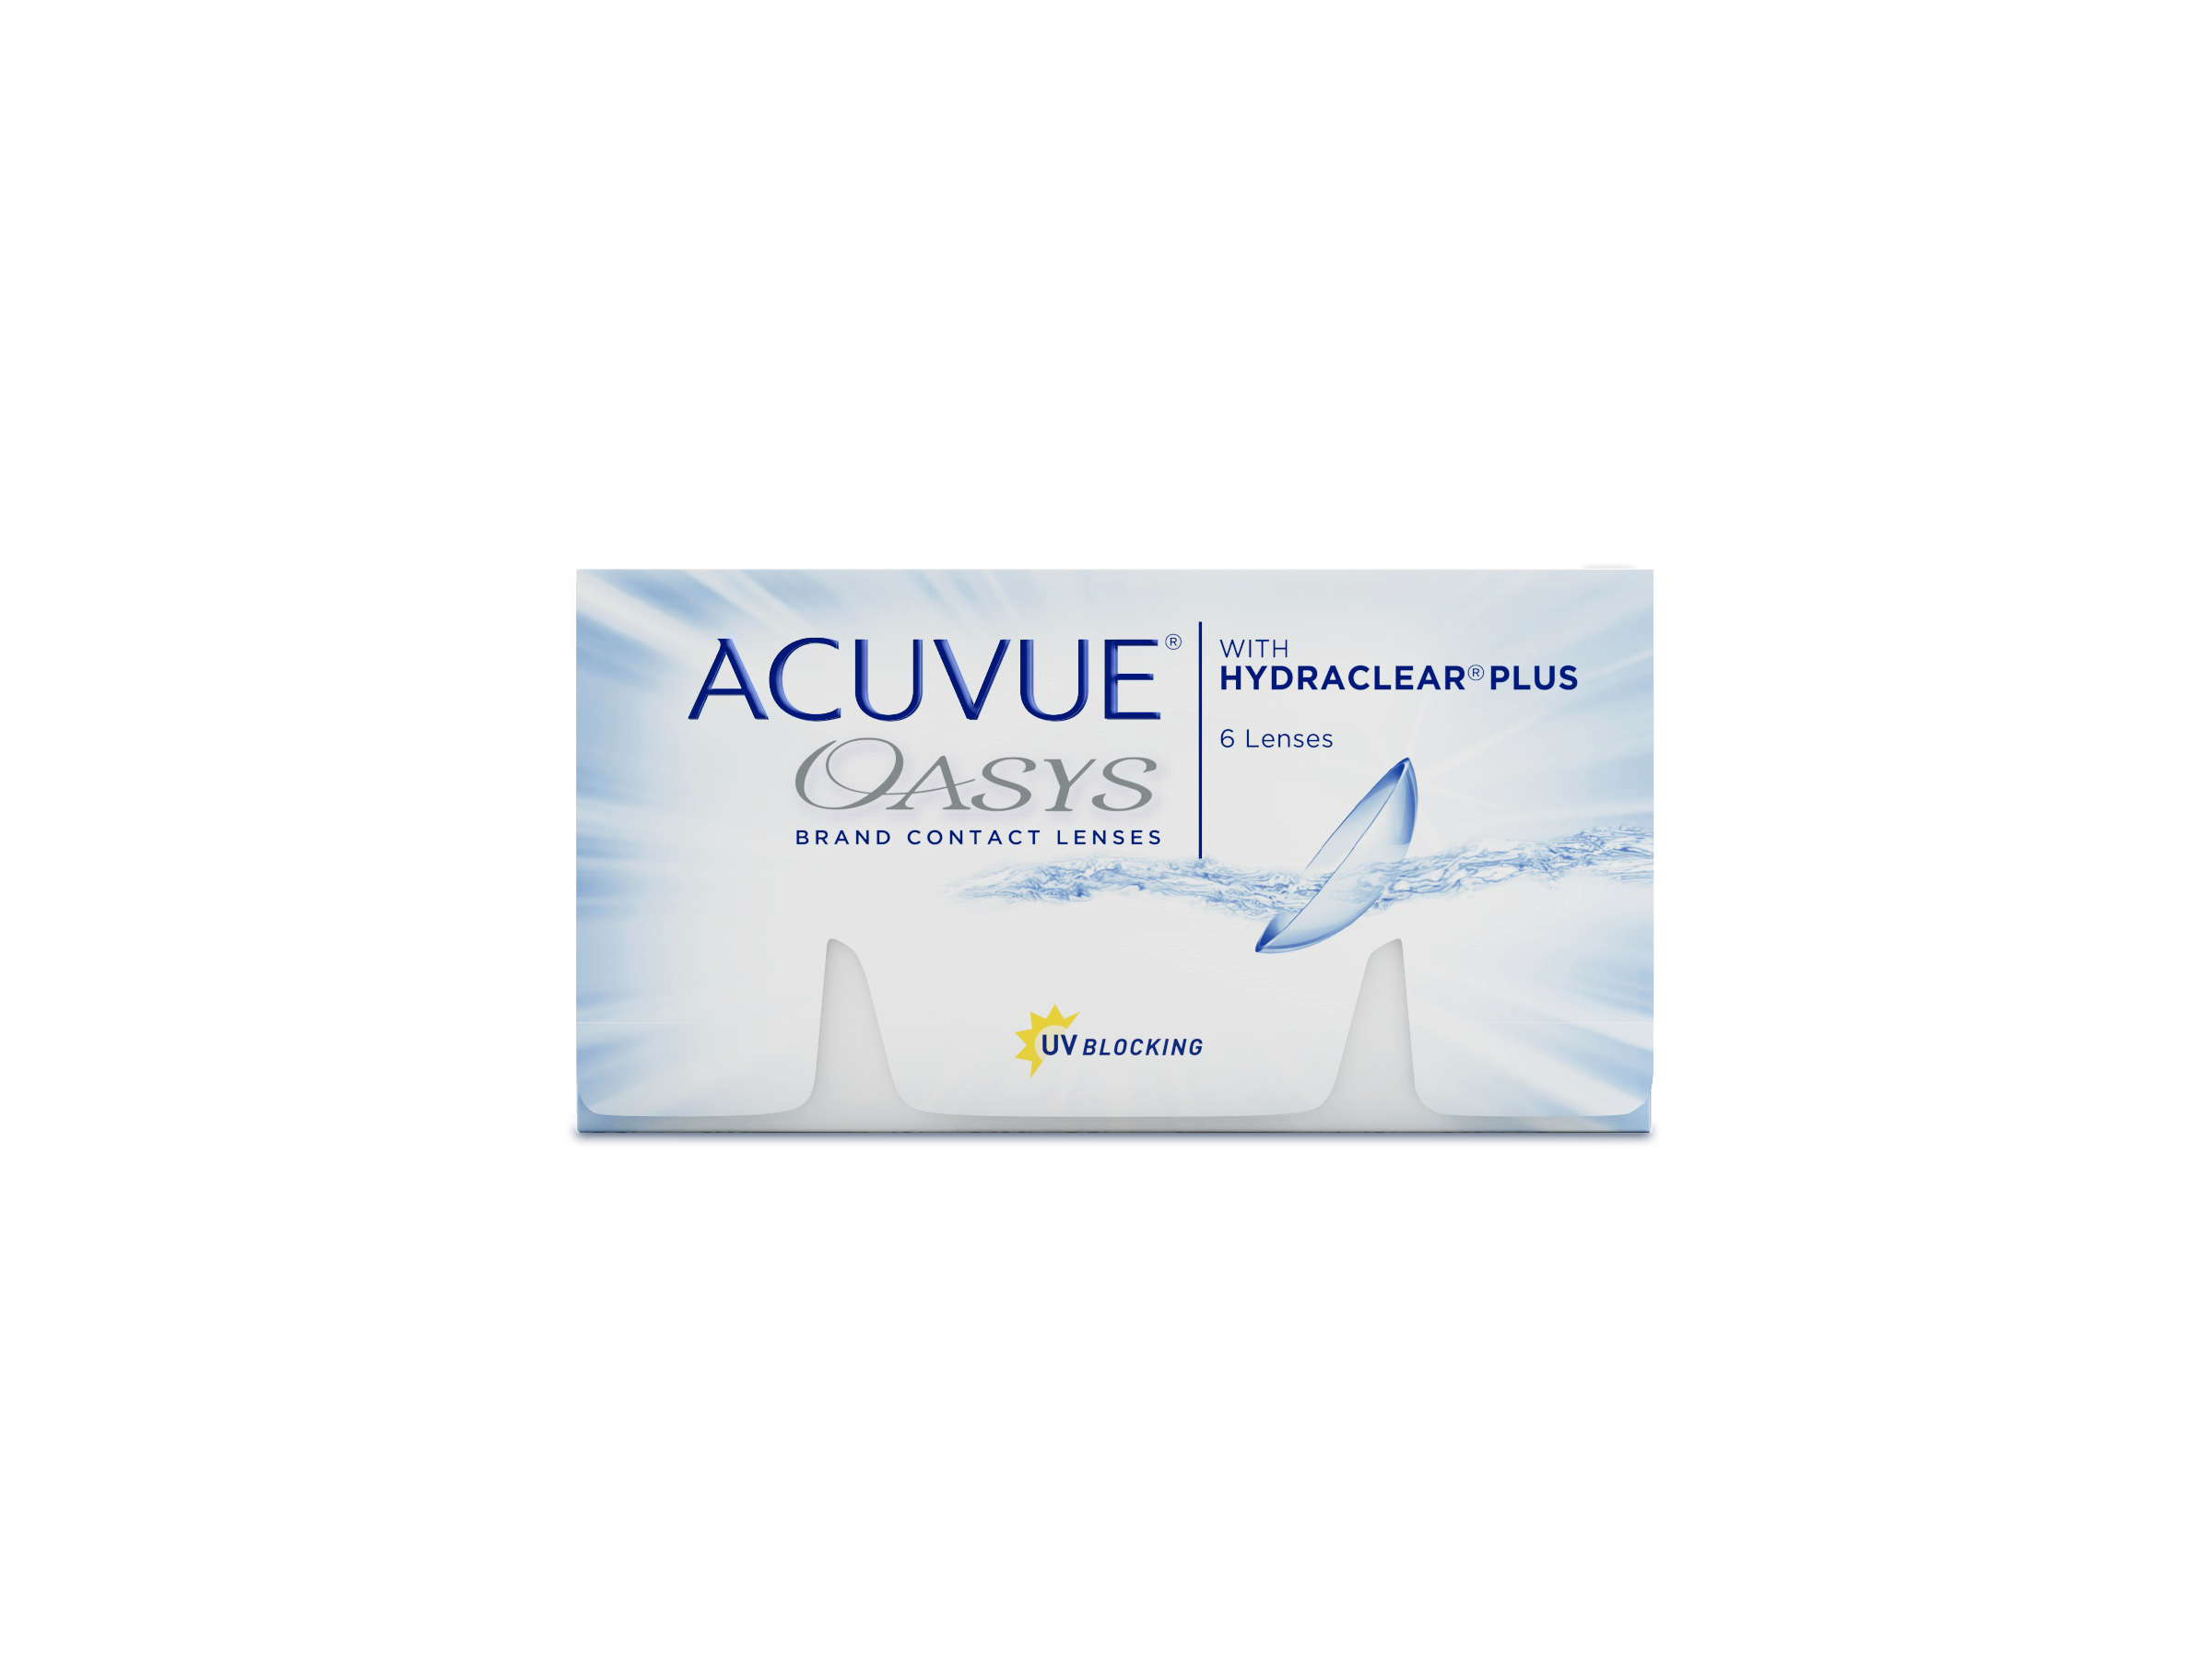 ACUVUE® OASYS with HYDRACLEAR® PLUS Technology Packshot